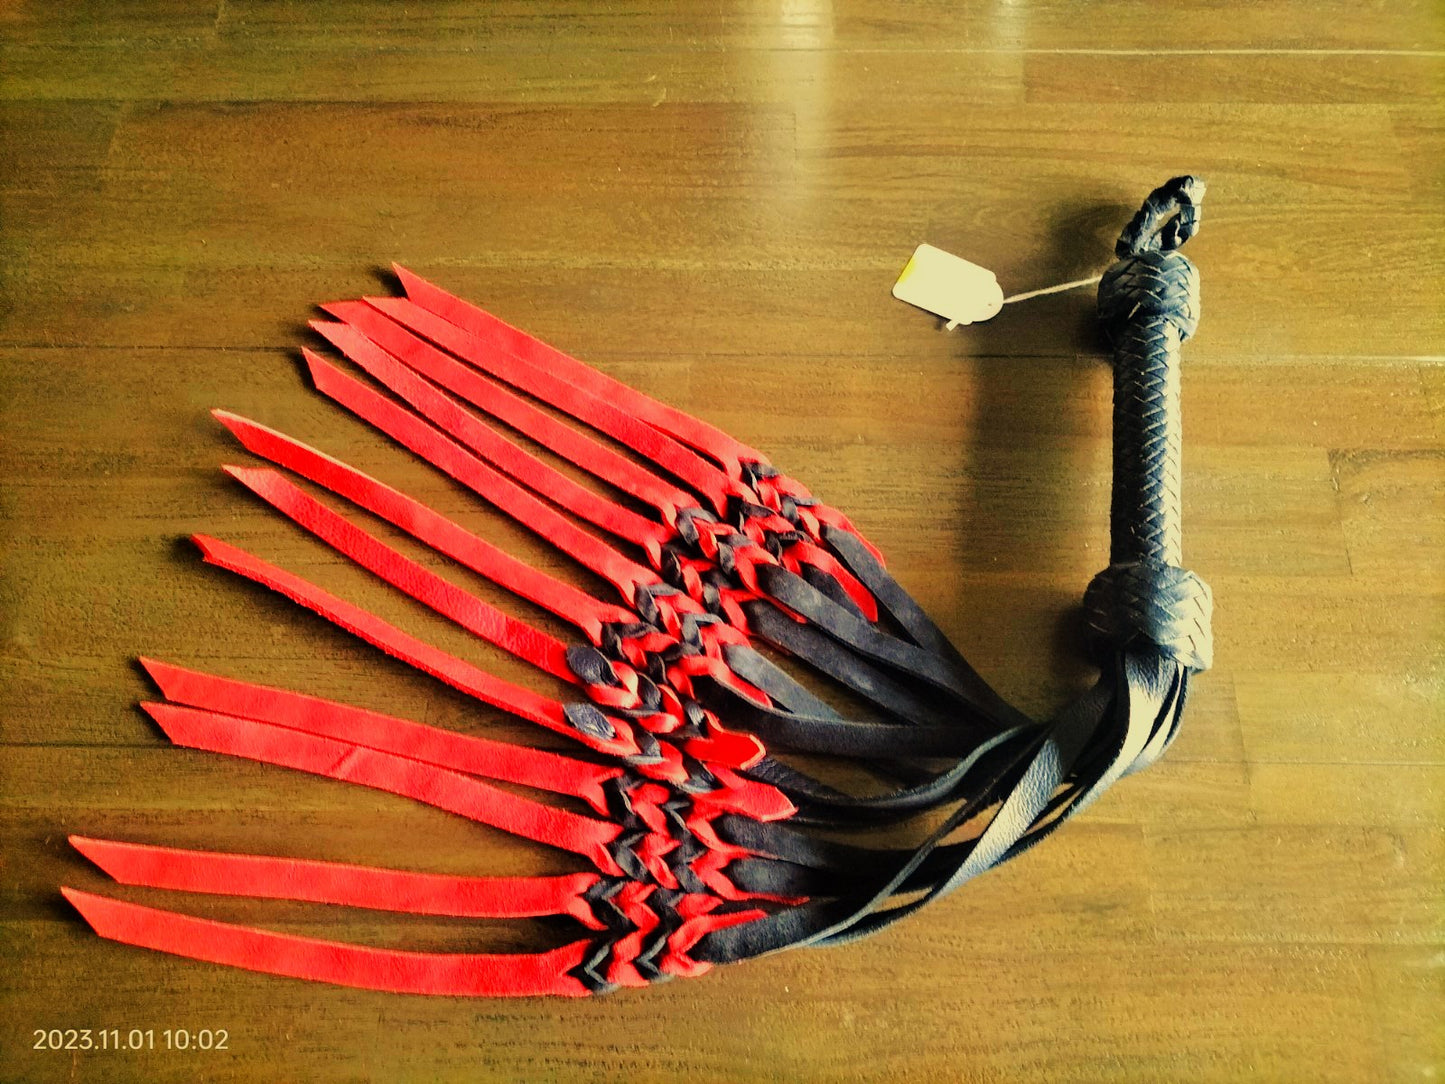 12 falls flogger with red-black woven falls of 4 mm thick